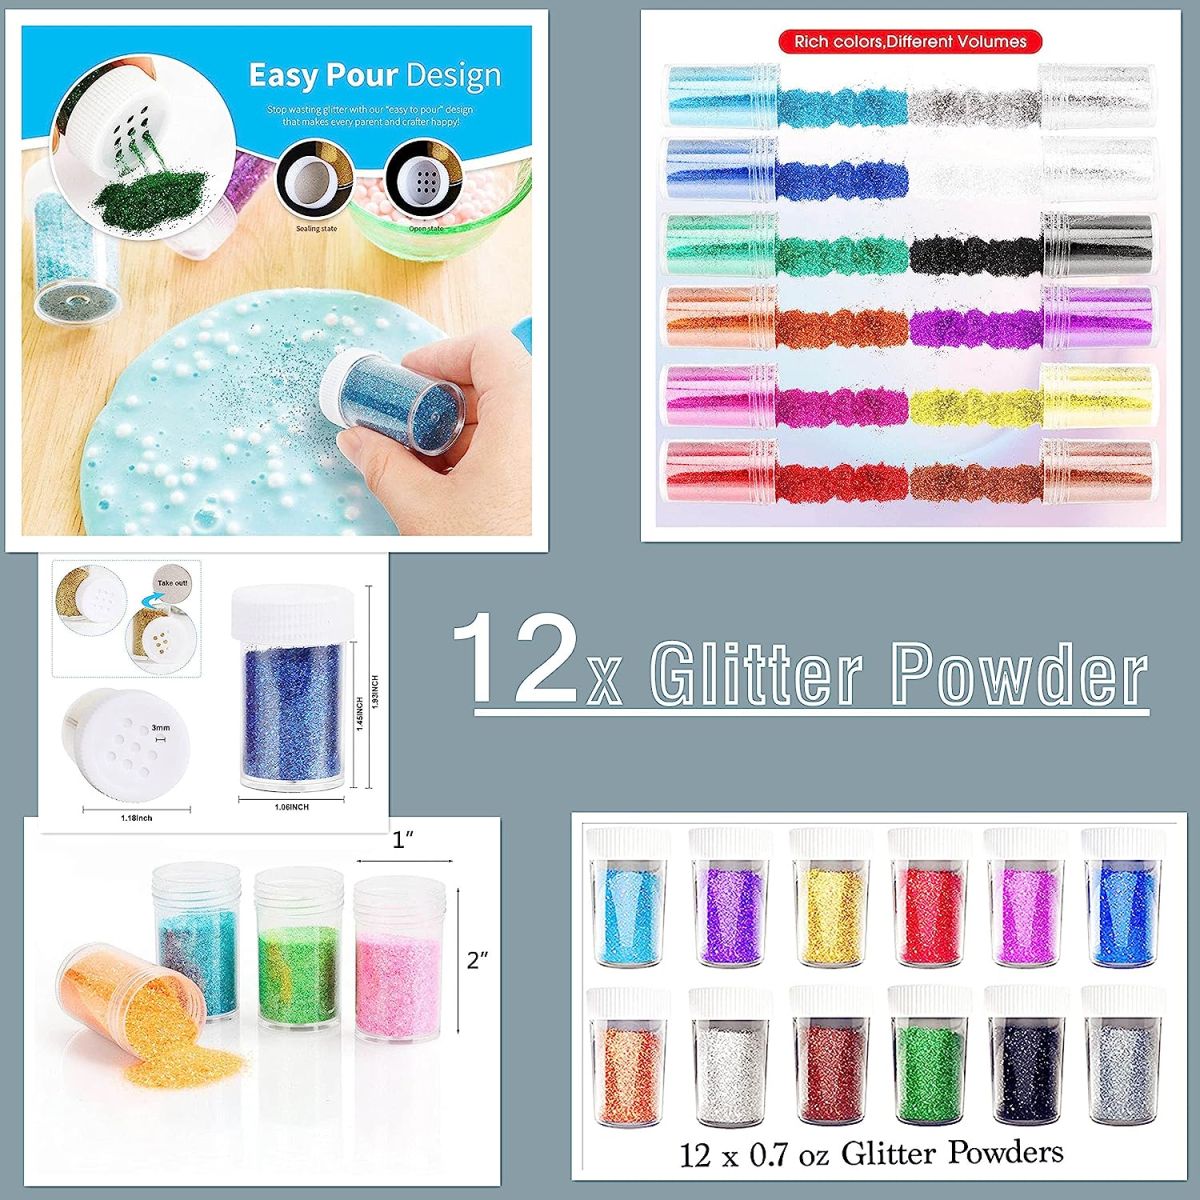 AFW Cup Turners for Tumblers Starter kit,Pen Spinner for Epoxy,Cup Spinner for Tumbler with Epoxy and Heat Gun,Epoxy Pen Turner Attachment,Epoxy Resin Tumbler Spinner